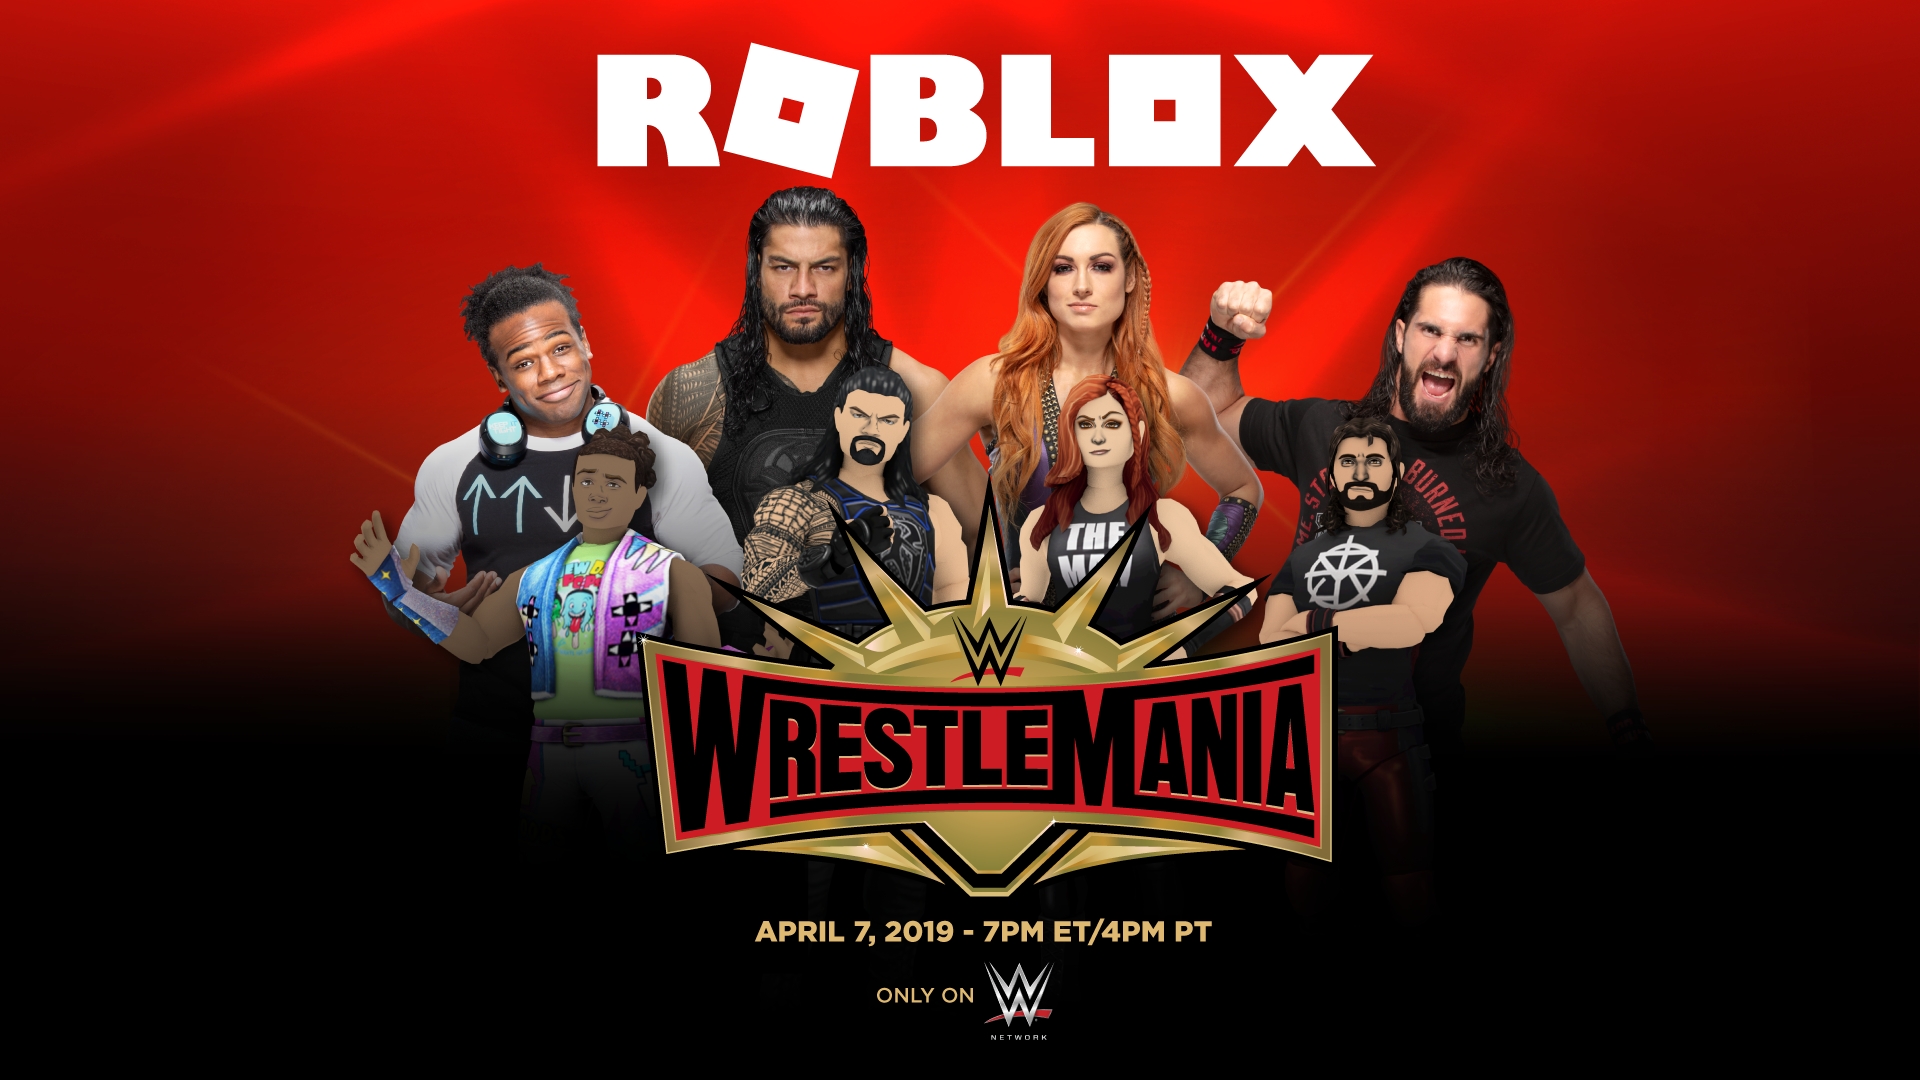 Roblox And Wwe Partner To Celebrate Wrestlemania Business Wire - roblox events april 2019